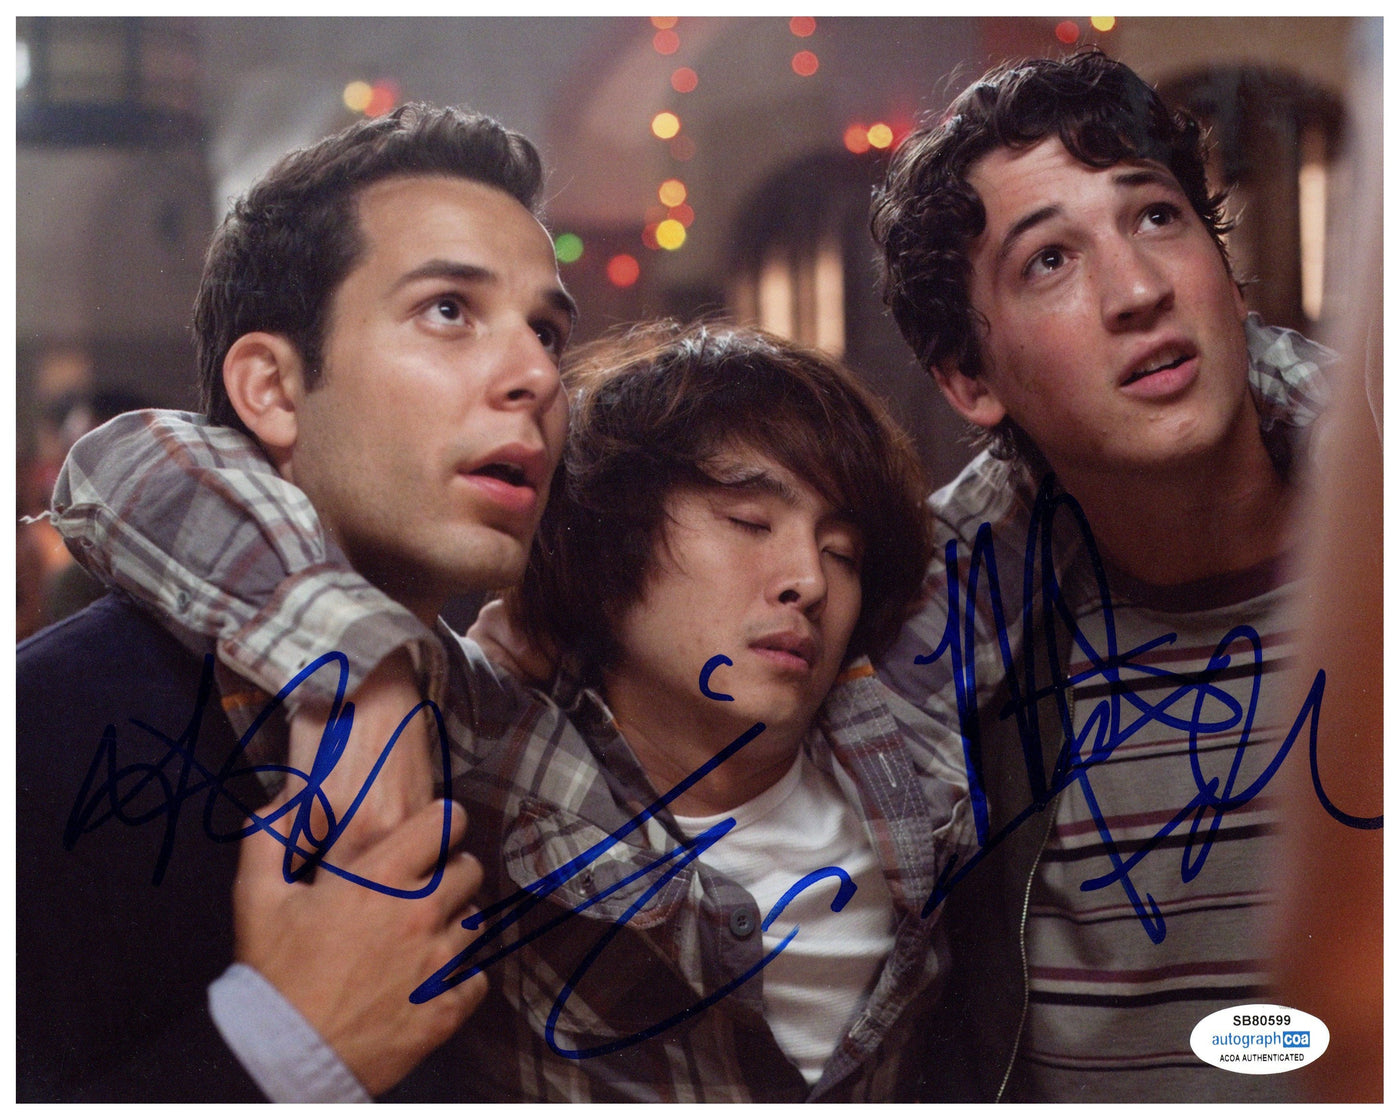 21 & Over Cast Signed 8x10 Photo Miles Teller Autographed ACOA #3